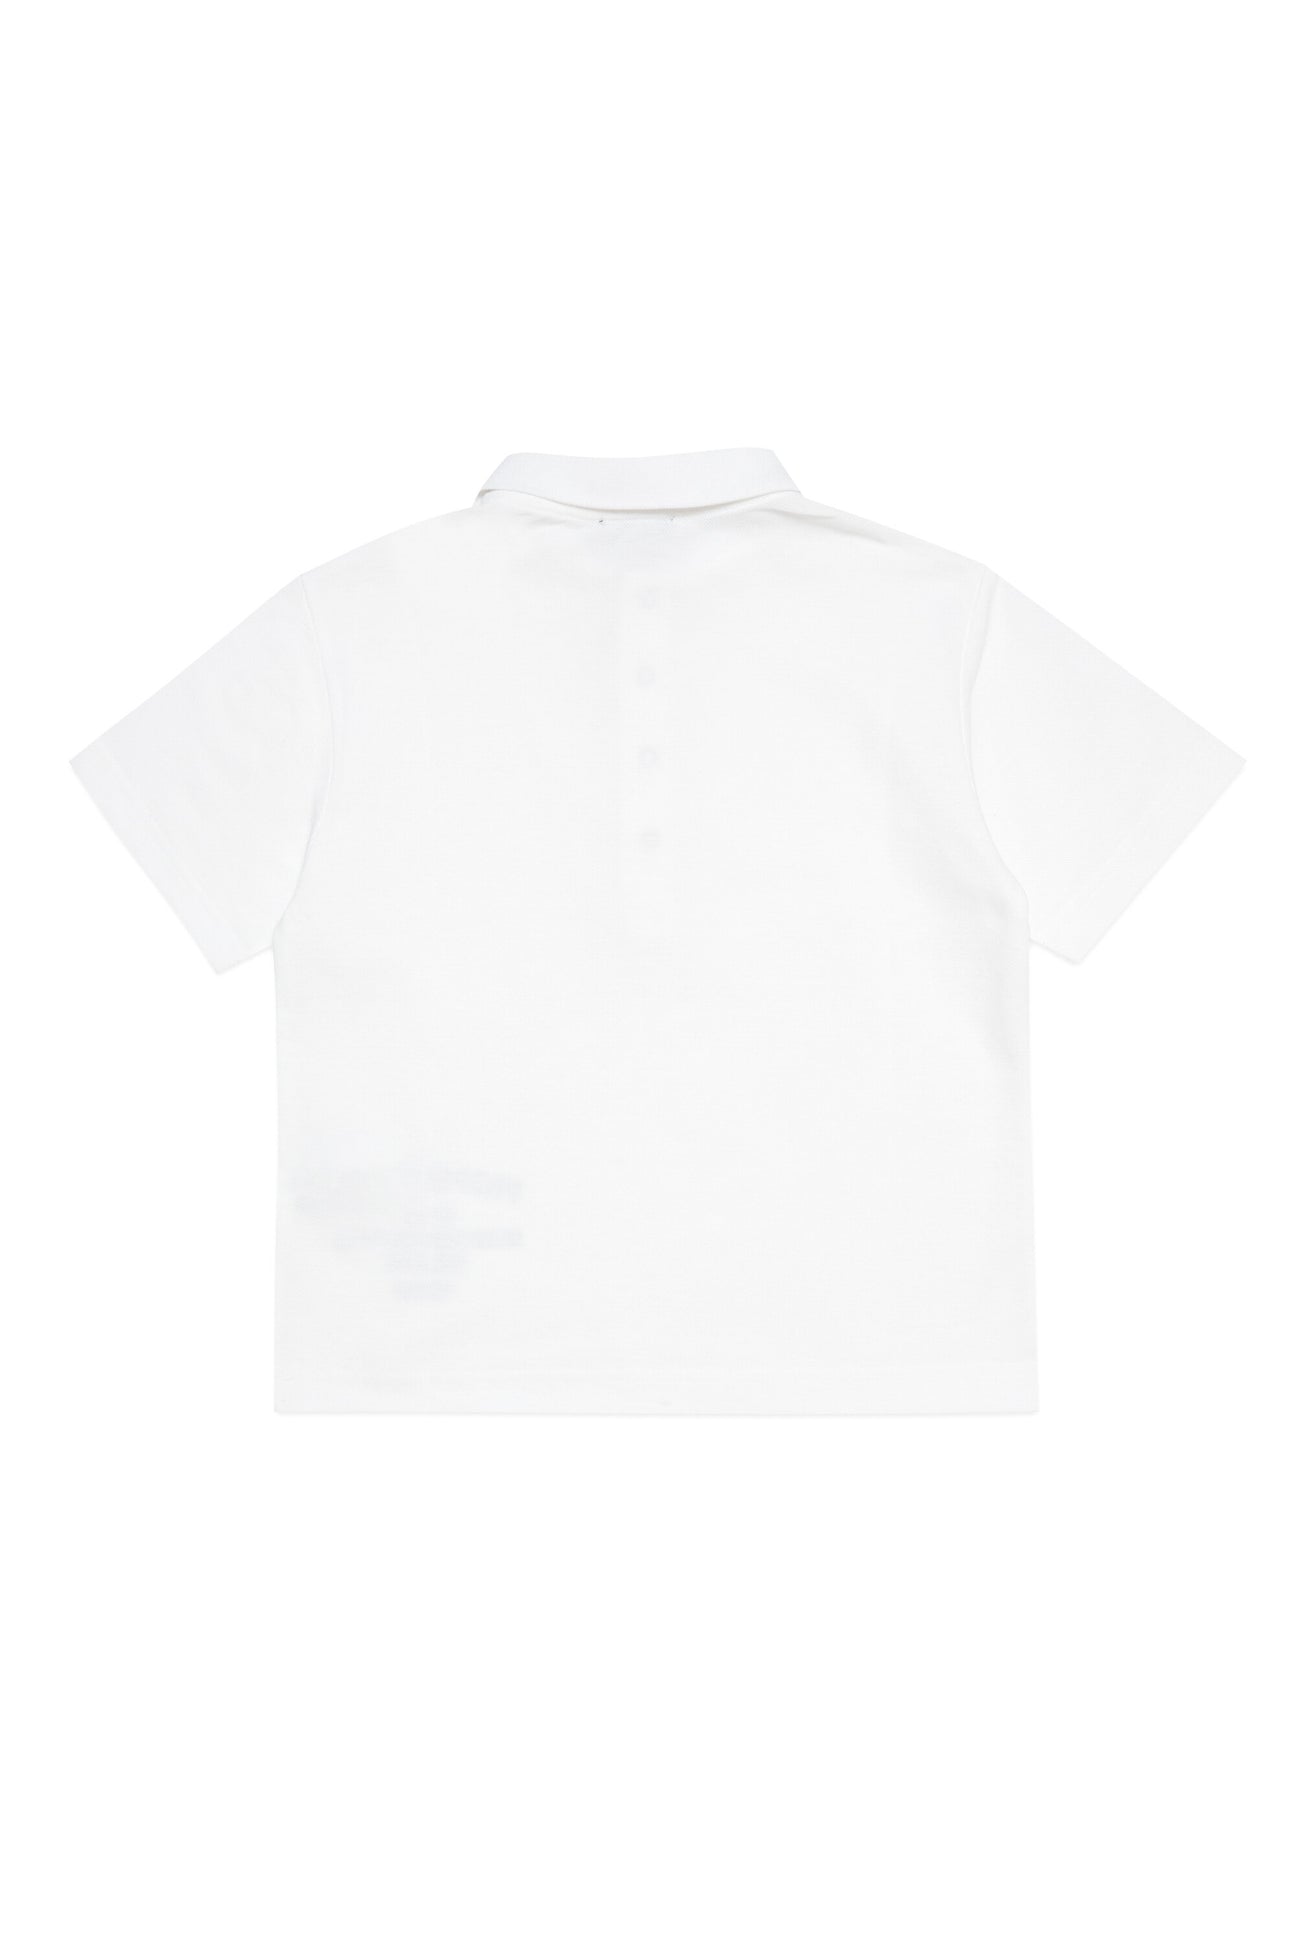 Property of N°21 branded polo shirt Property of N°21 branded polo shirt